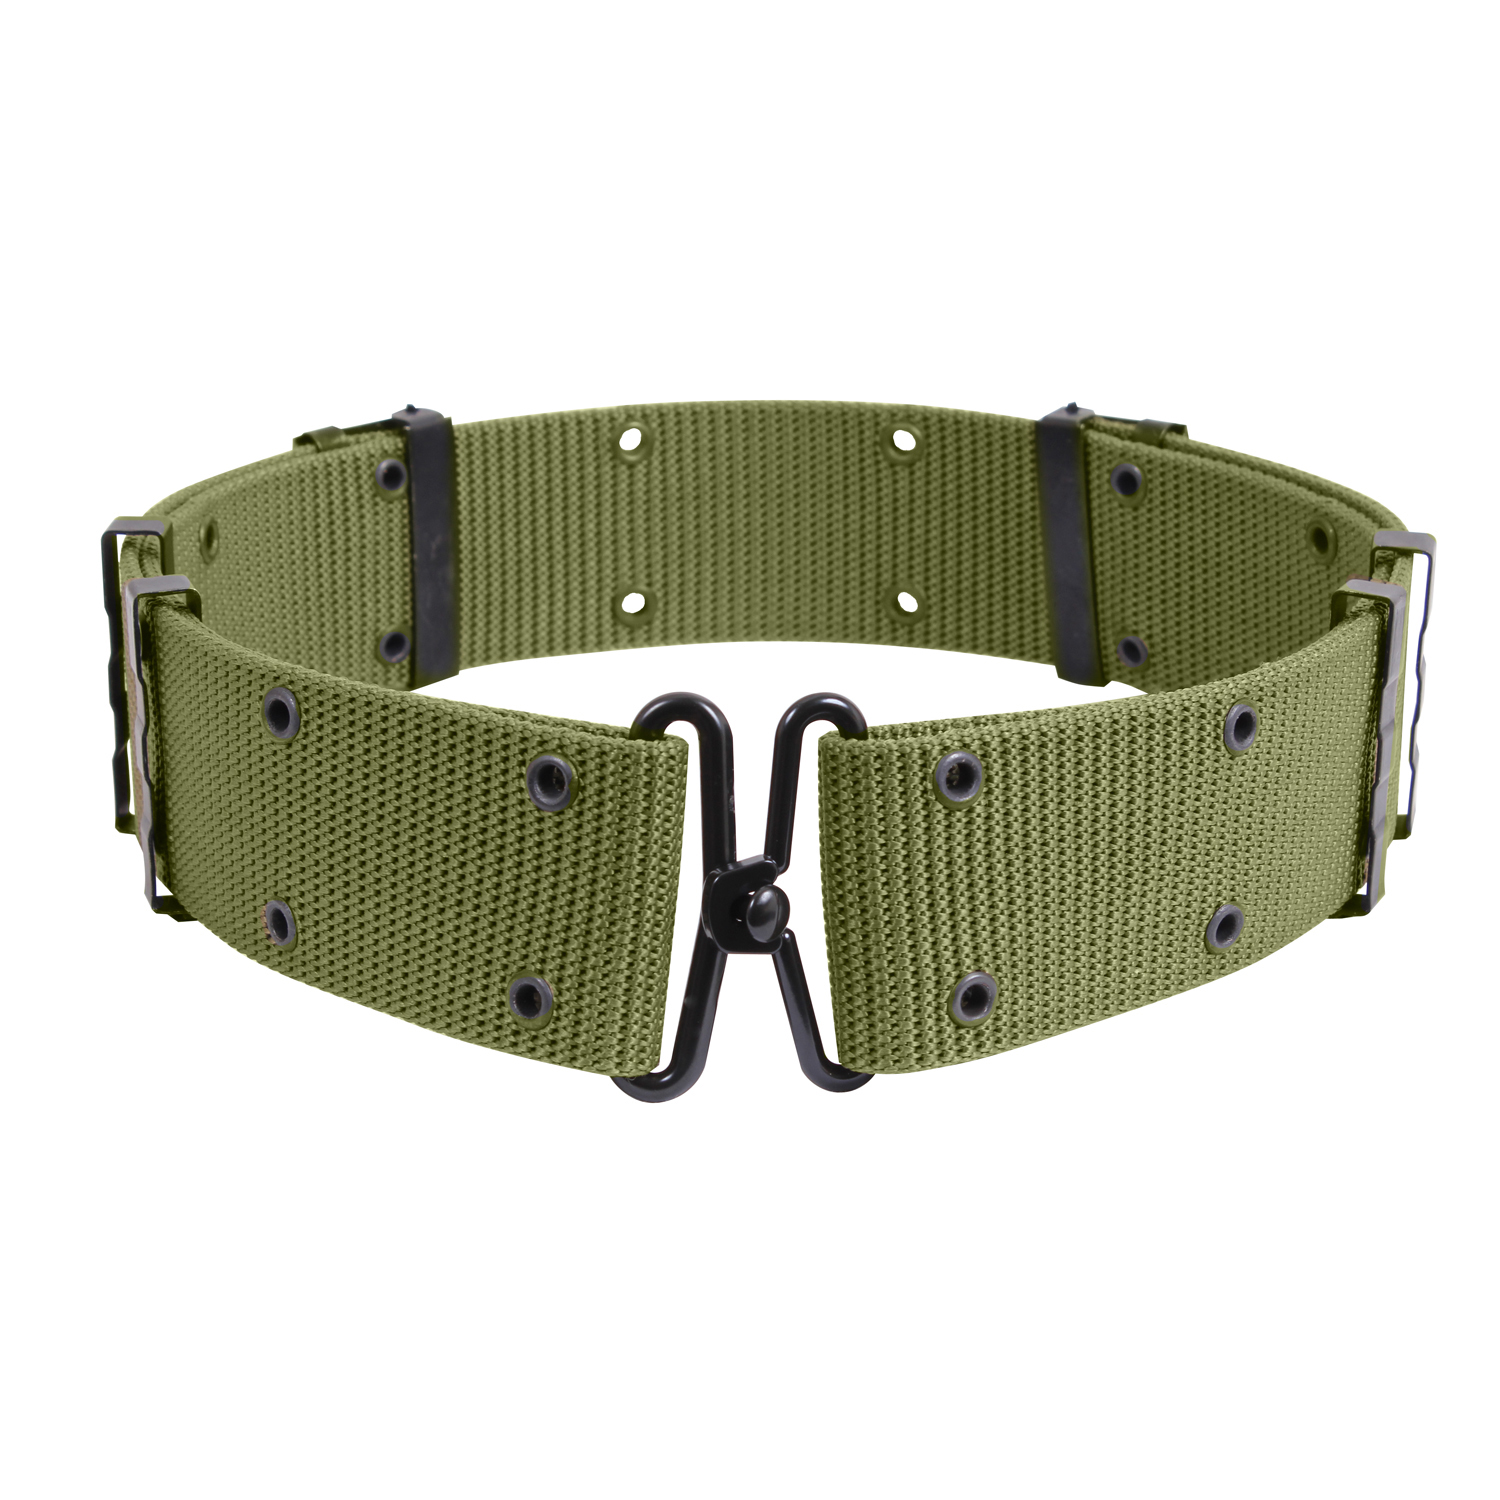 Rothco Pistol Belt With Metal Buckle